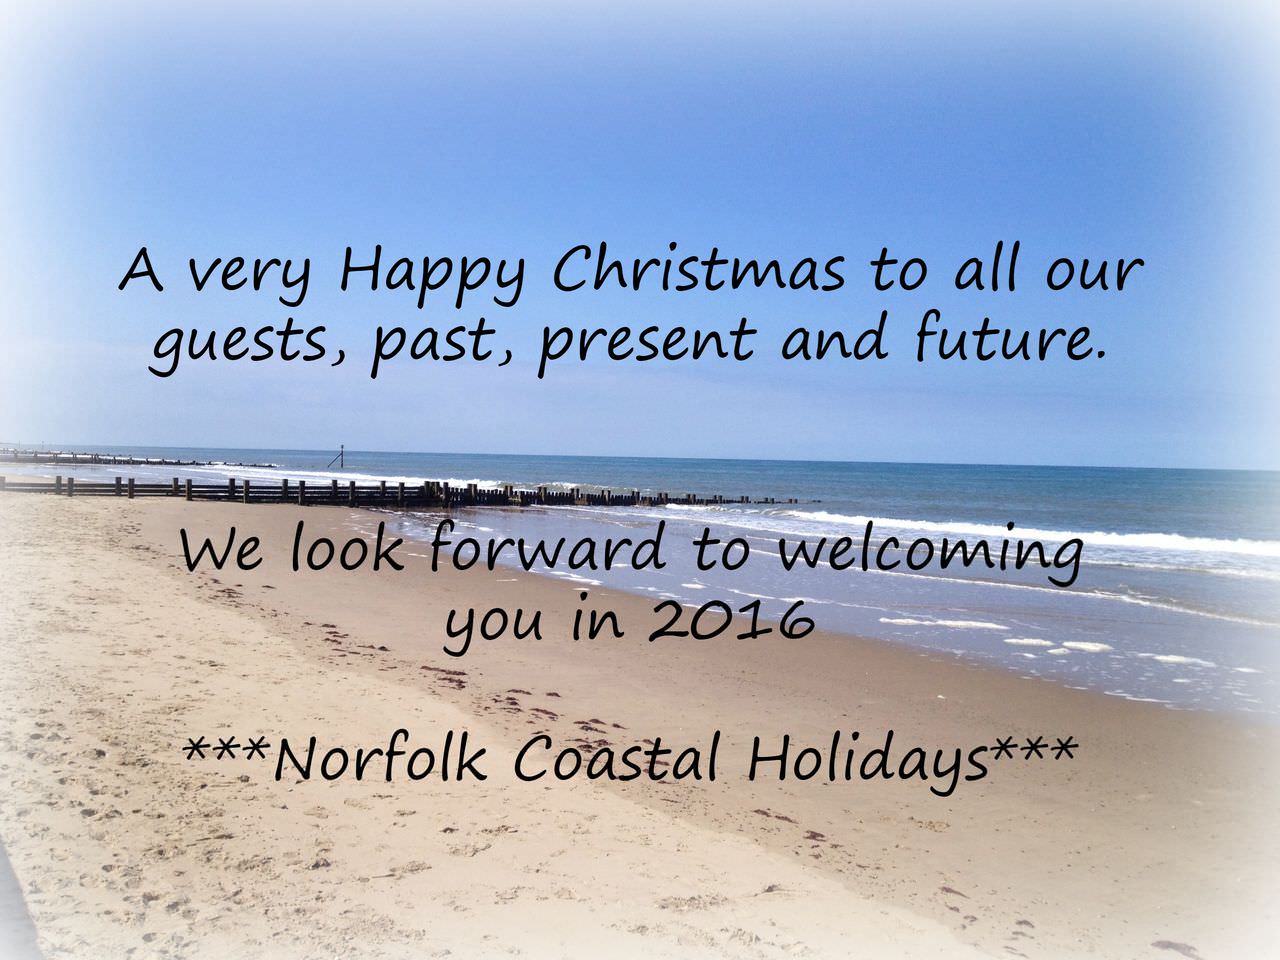 Christmas wishes from Norfolk